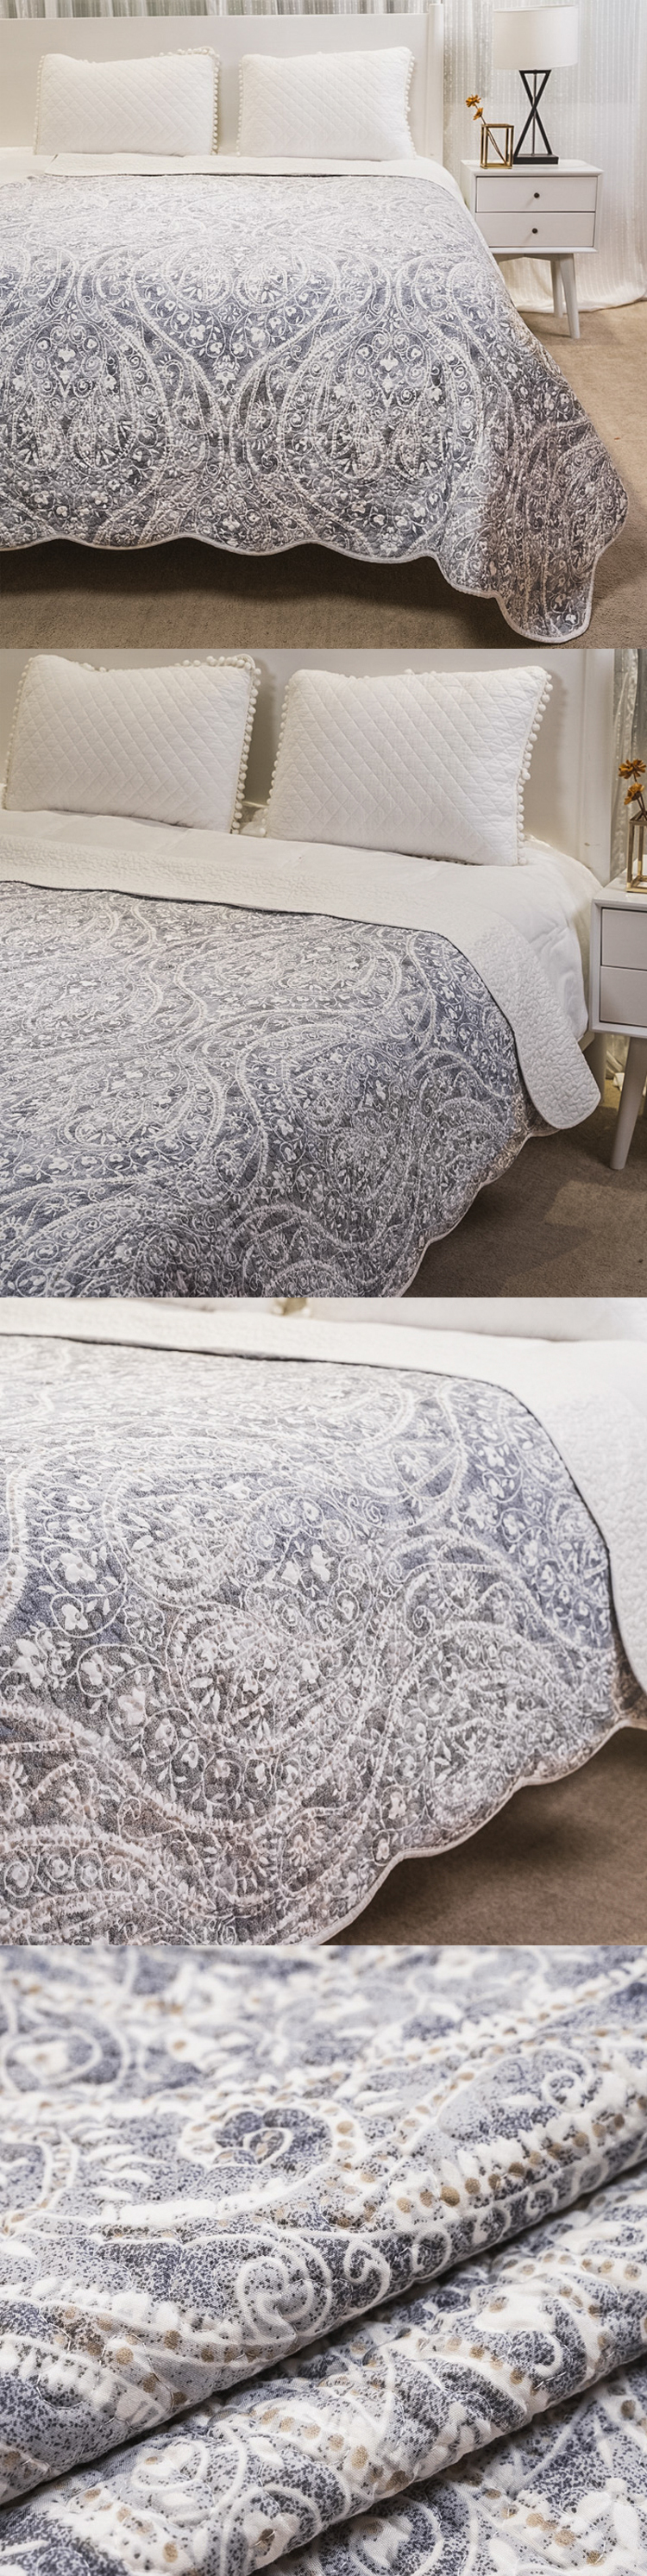 Oversized Washed Lightweight Printed Floral Bed Coverlet 100 cotton Quilt Bedspread Cover Set 